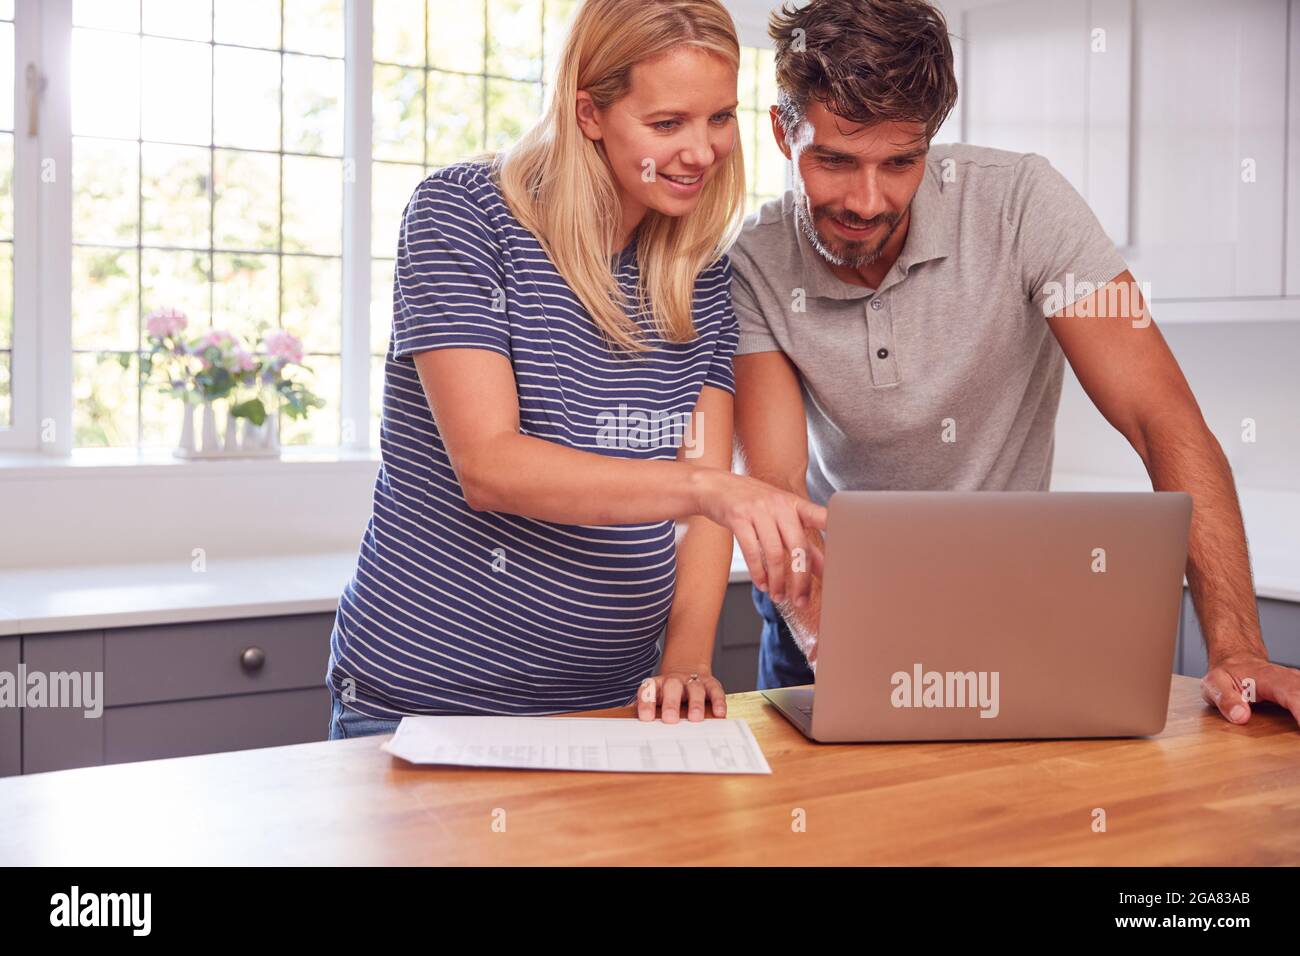 Couple With Pregnant Wife At Home Buying Products Or Services Online Using Laptop Stock Photo